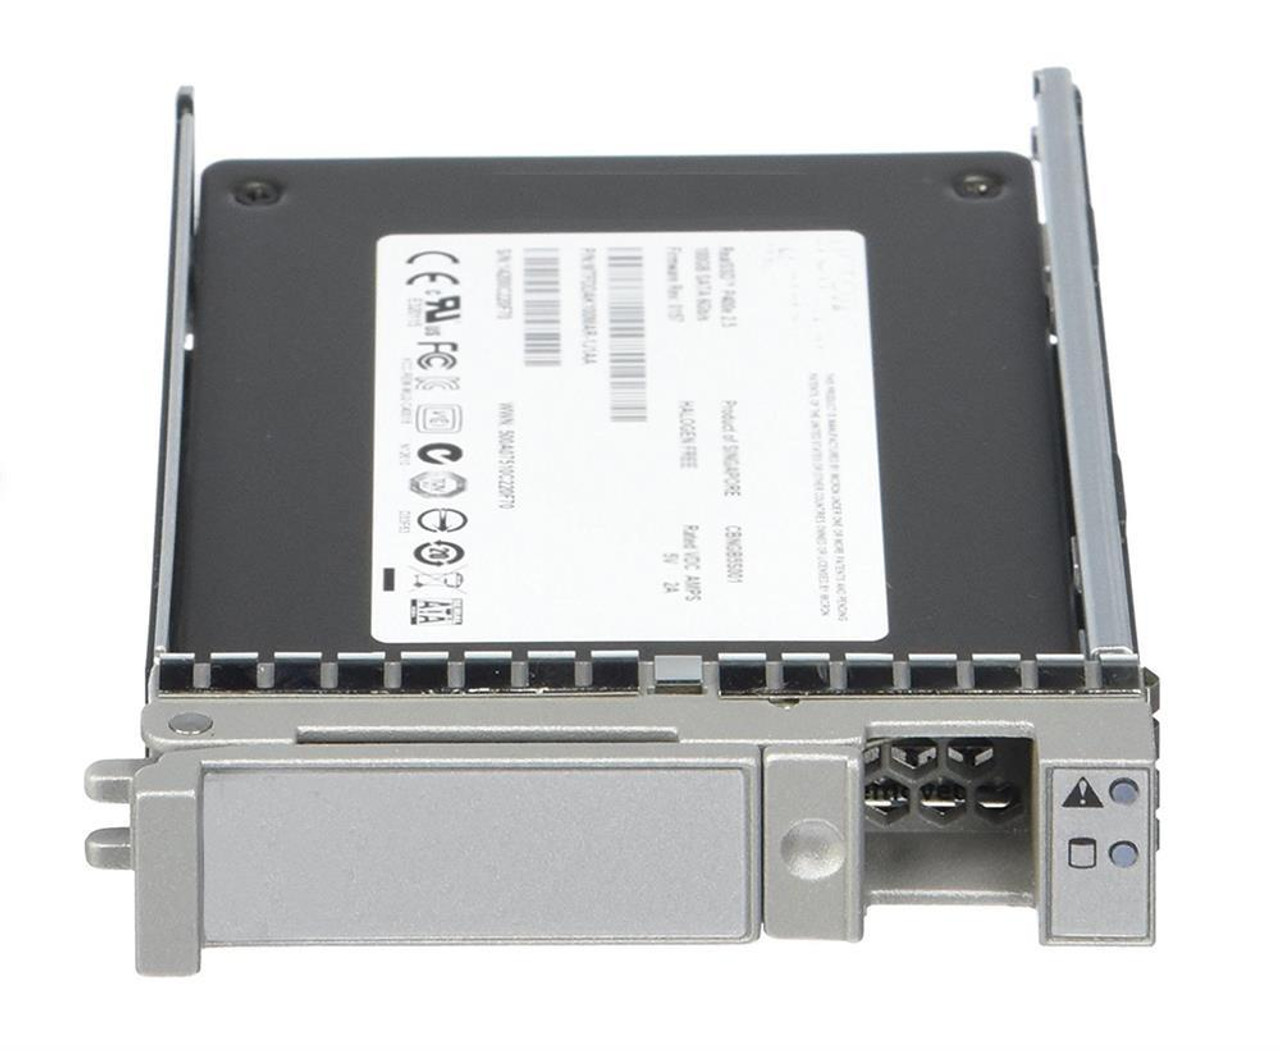 UCSX-SD38TBKNK9= Cisco 3.8TB SAS 12Gbps Enterprise Value (SED-FIPS) 2.5-inch Internal Solid State Drive (SSD)